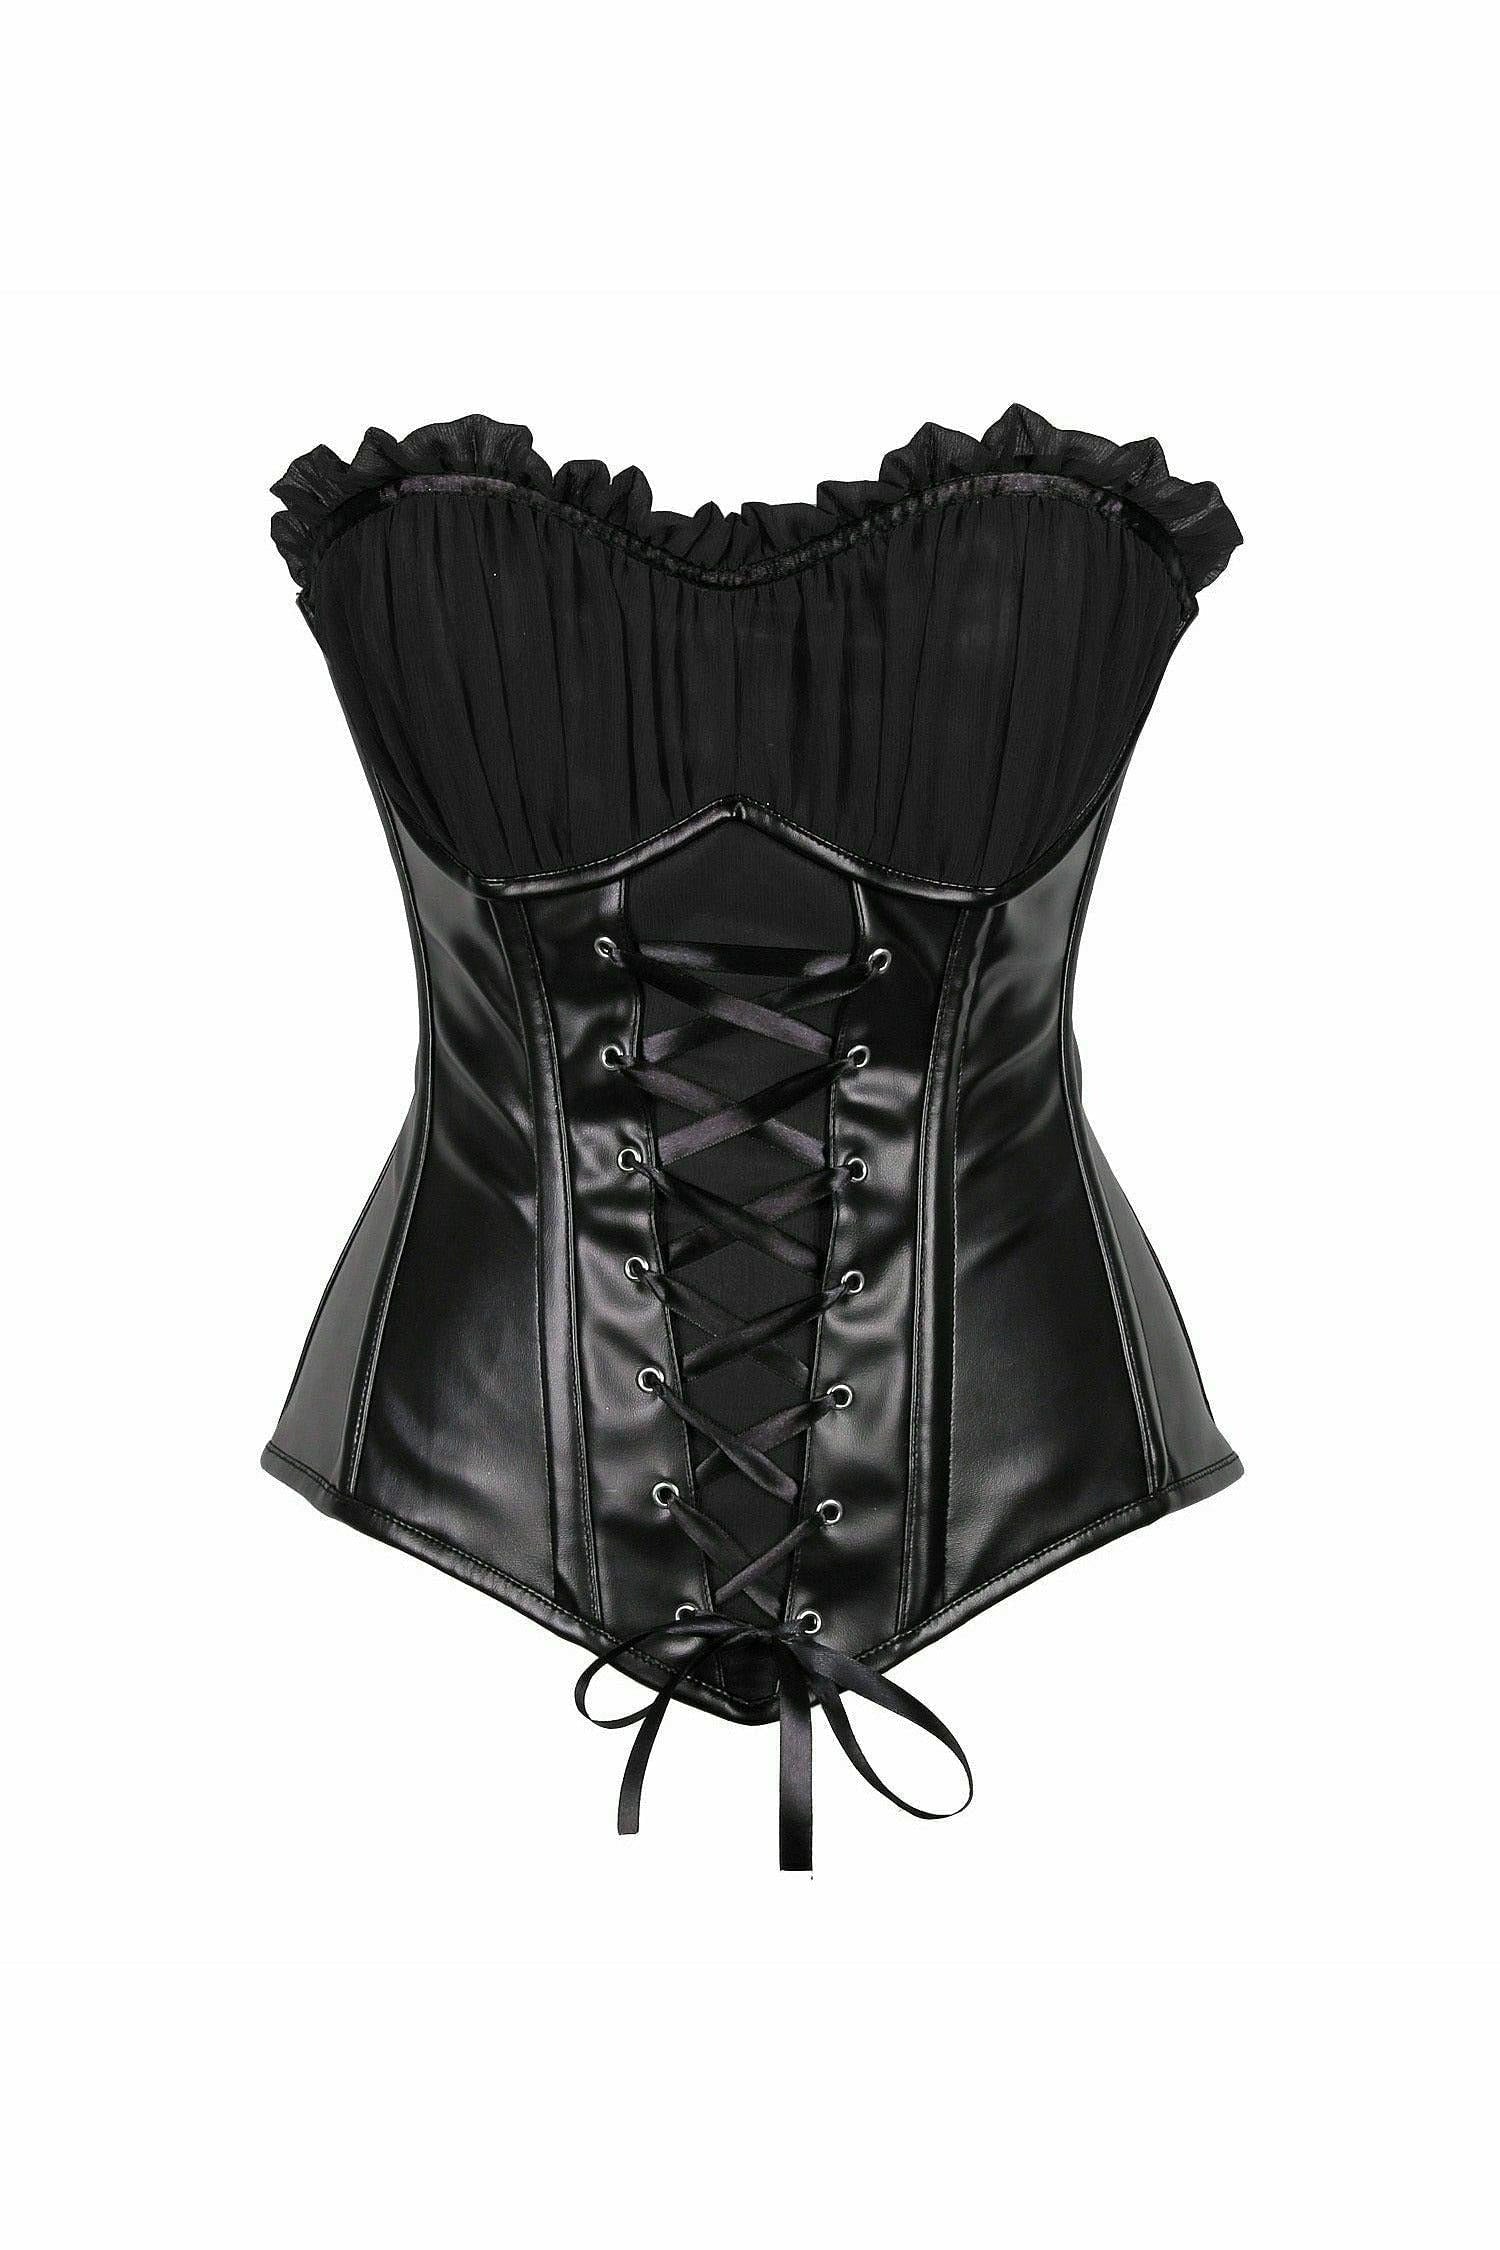 Top Drawer Black Faux Leather Lace-Up Steel Boned Corset